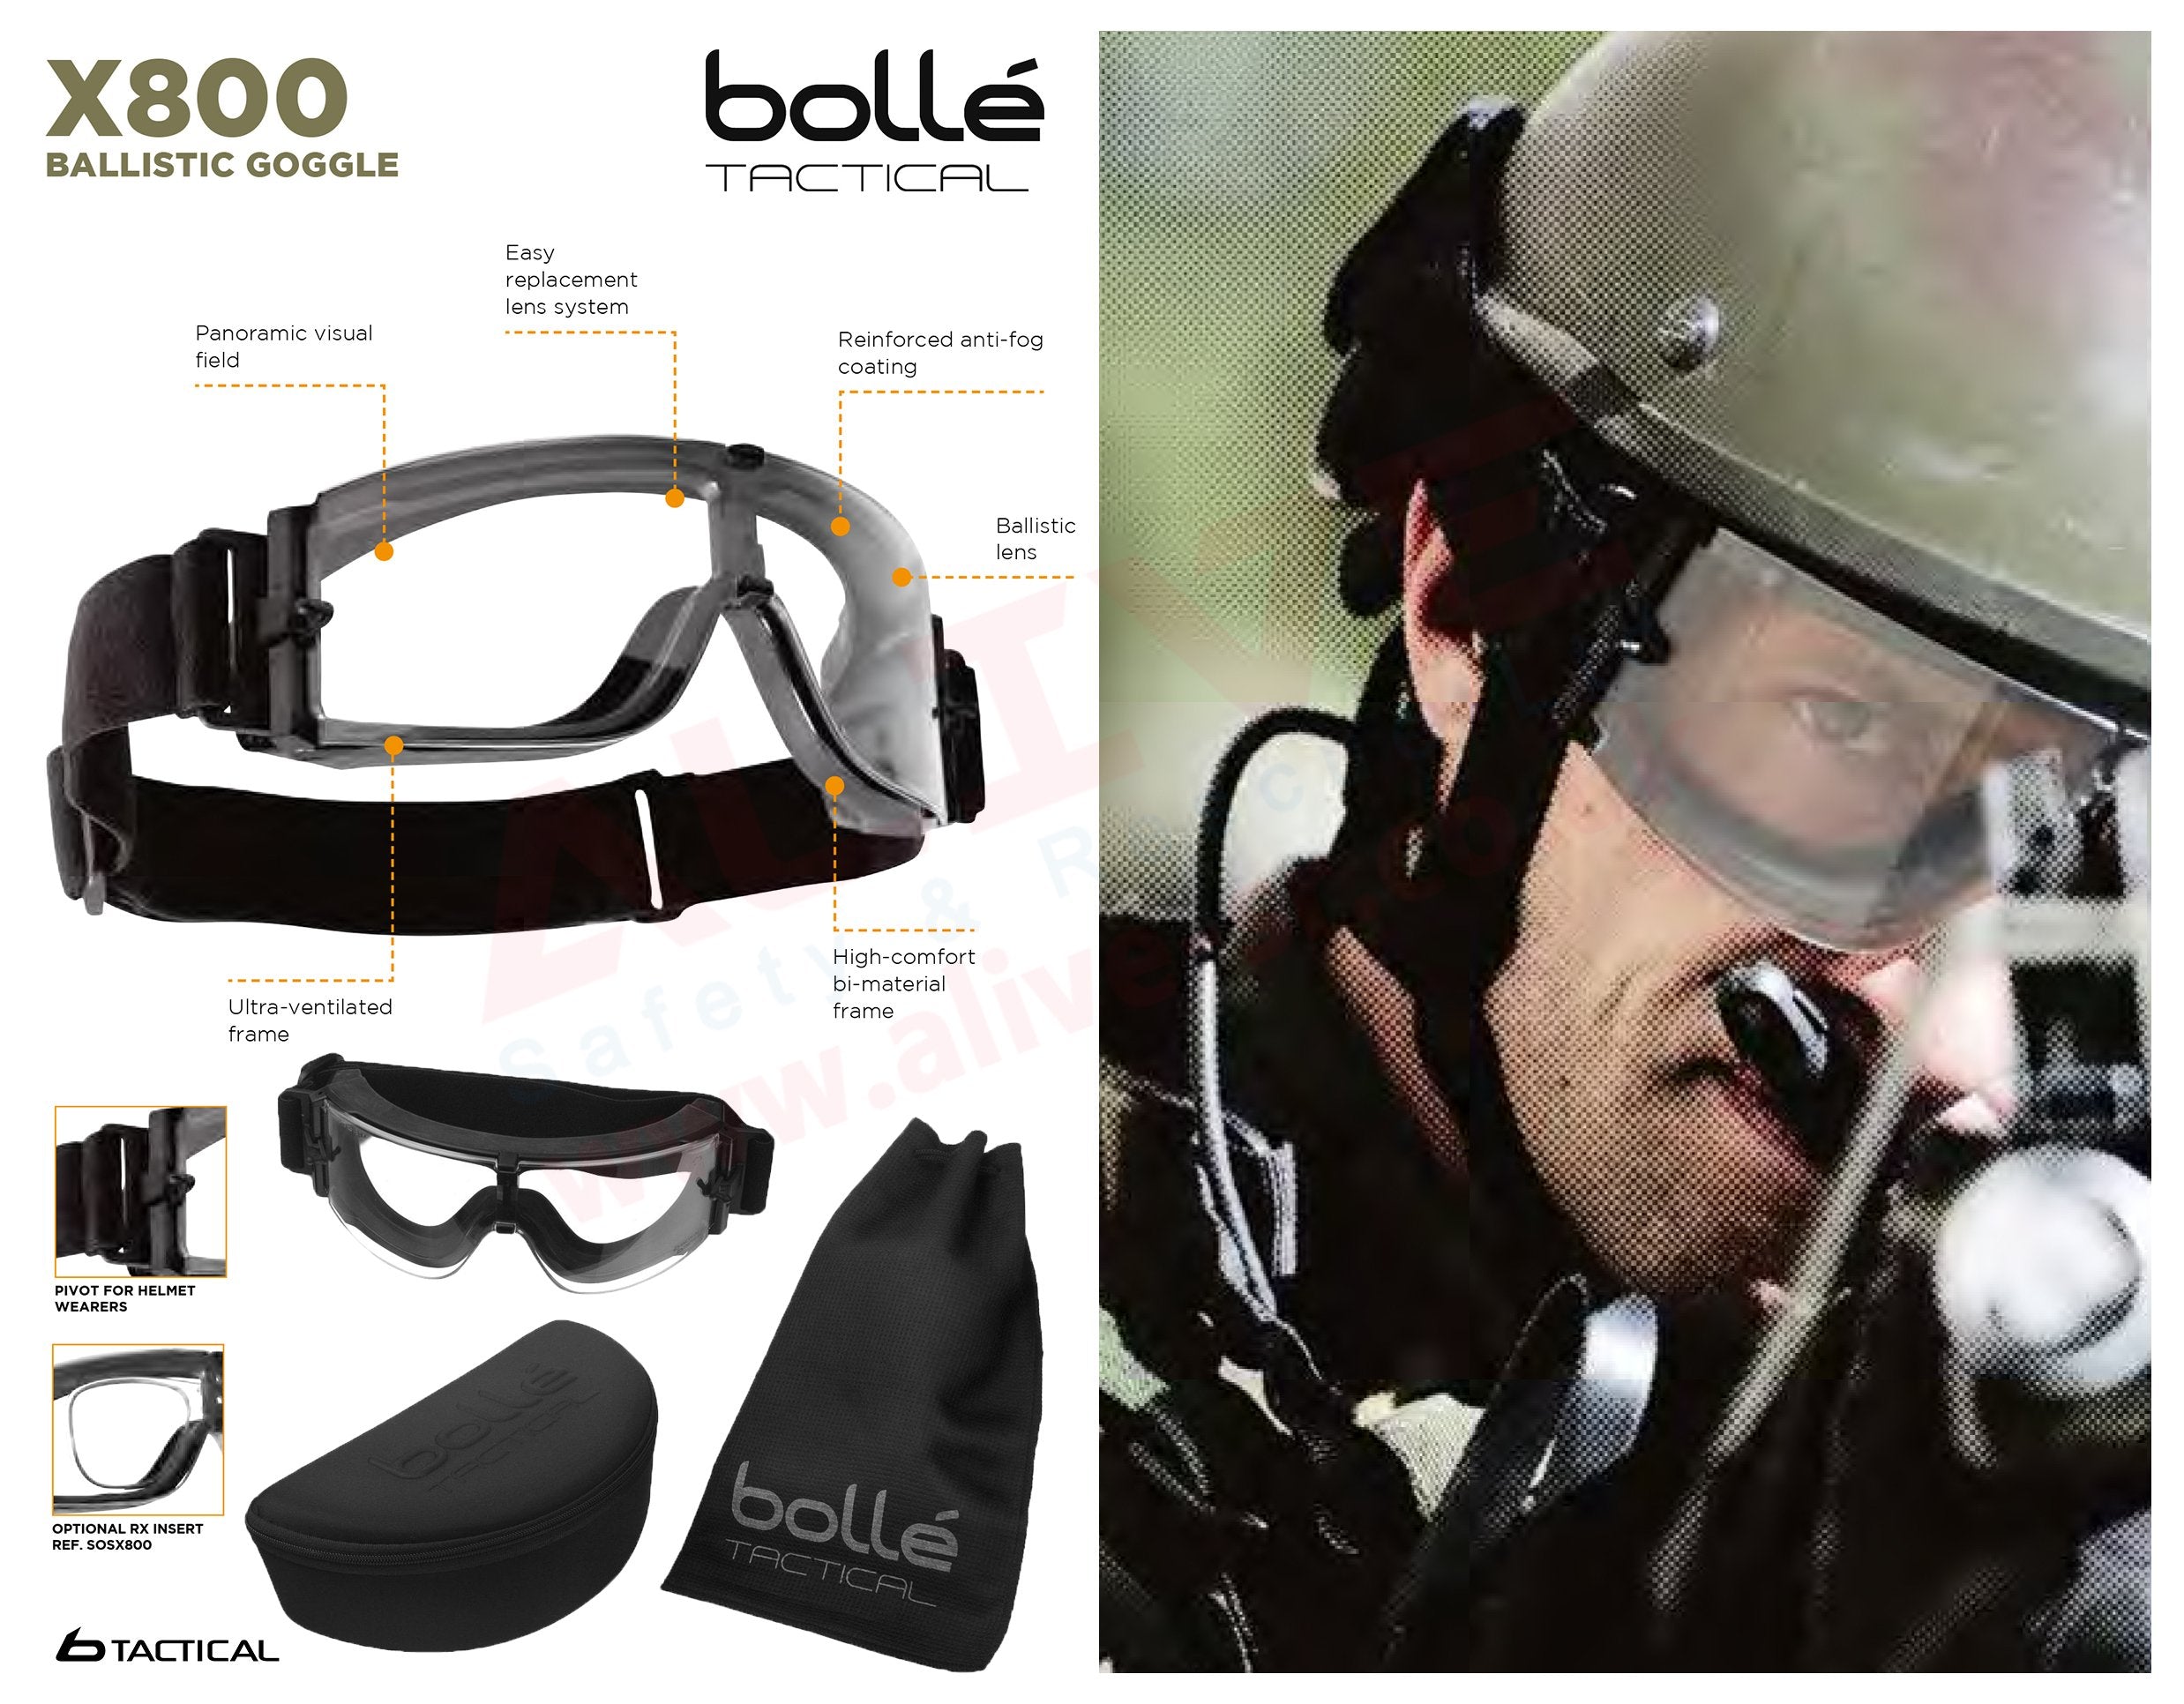 Bolle Tactical X800 Ballistic Goggles with military